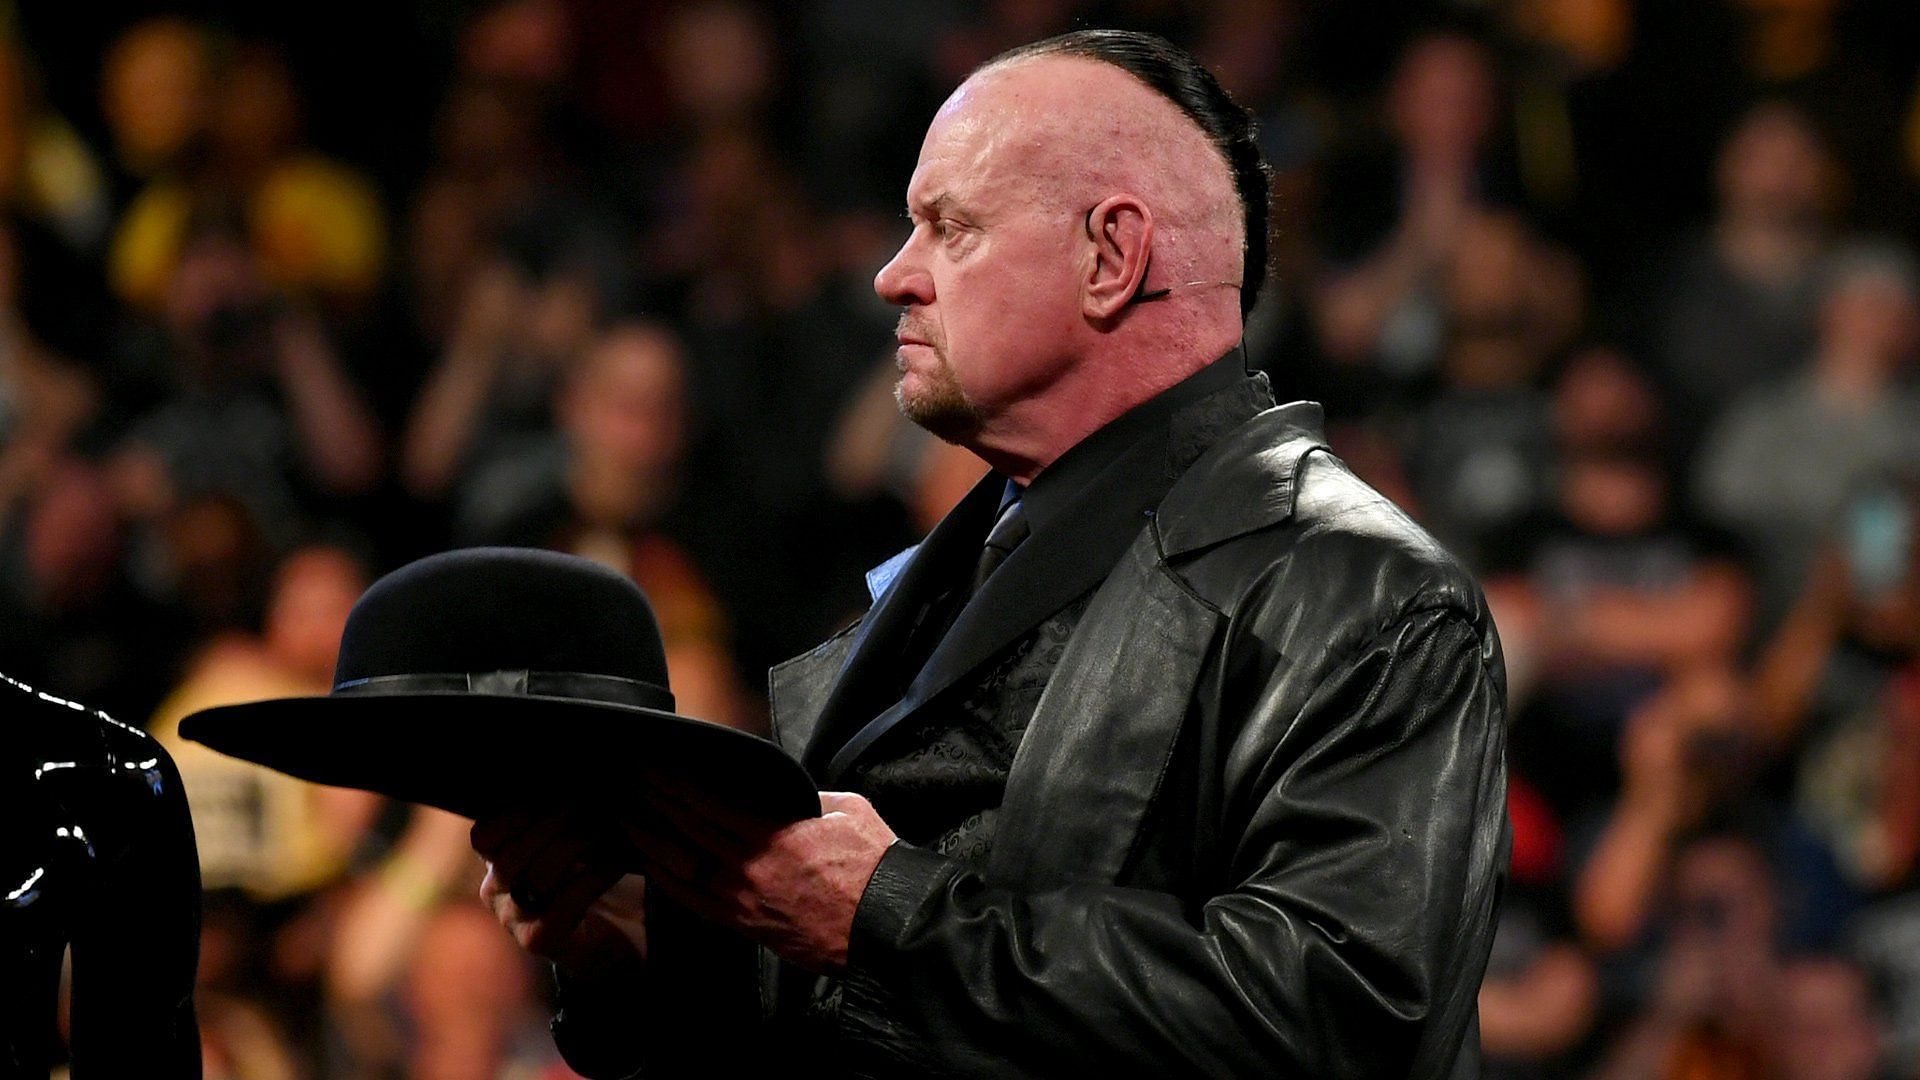 The Undertaker became a WWE Hall of Famer in 2022